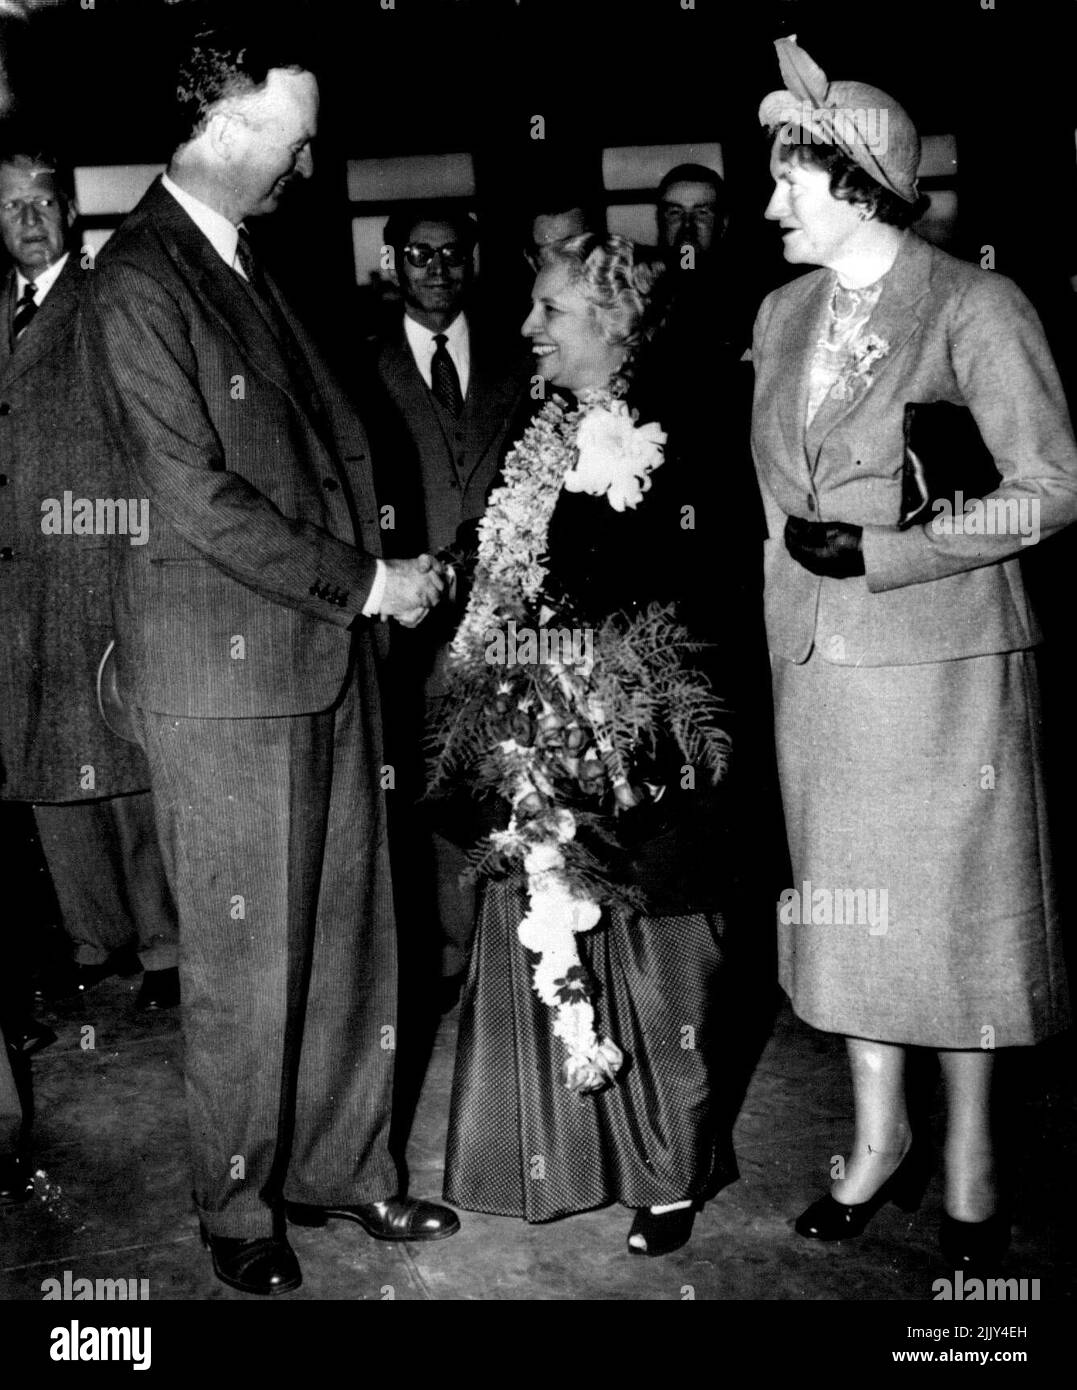 Goodbye To Madame Pandit - Madame Vijava Lakshmi Pandit, India's retiring ambassador, wears and carries farewell flower gifts as she receives a goodbye and a handshake from Sir Oliver Franks, British ambassador, at Union station this evening. Mrs. Franks (right) is with them, John Simmons (left background, state department protocol chief, represented the U.S. as Mme. Pandit left for New York on her way home. She will become a candidate for parliament in India's first constitutional election. November 15, 1951. (Photo by AP Wirephoto). Stock Photo